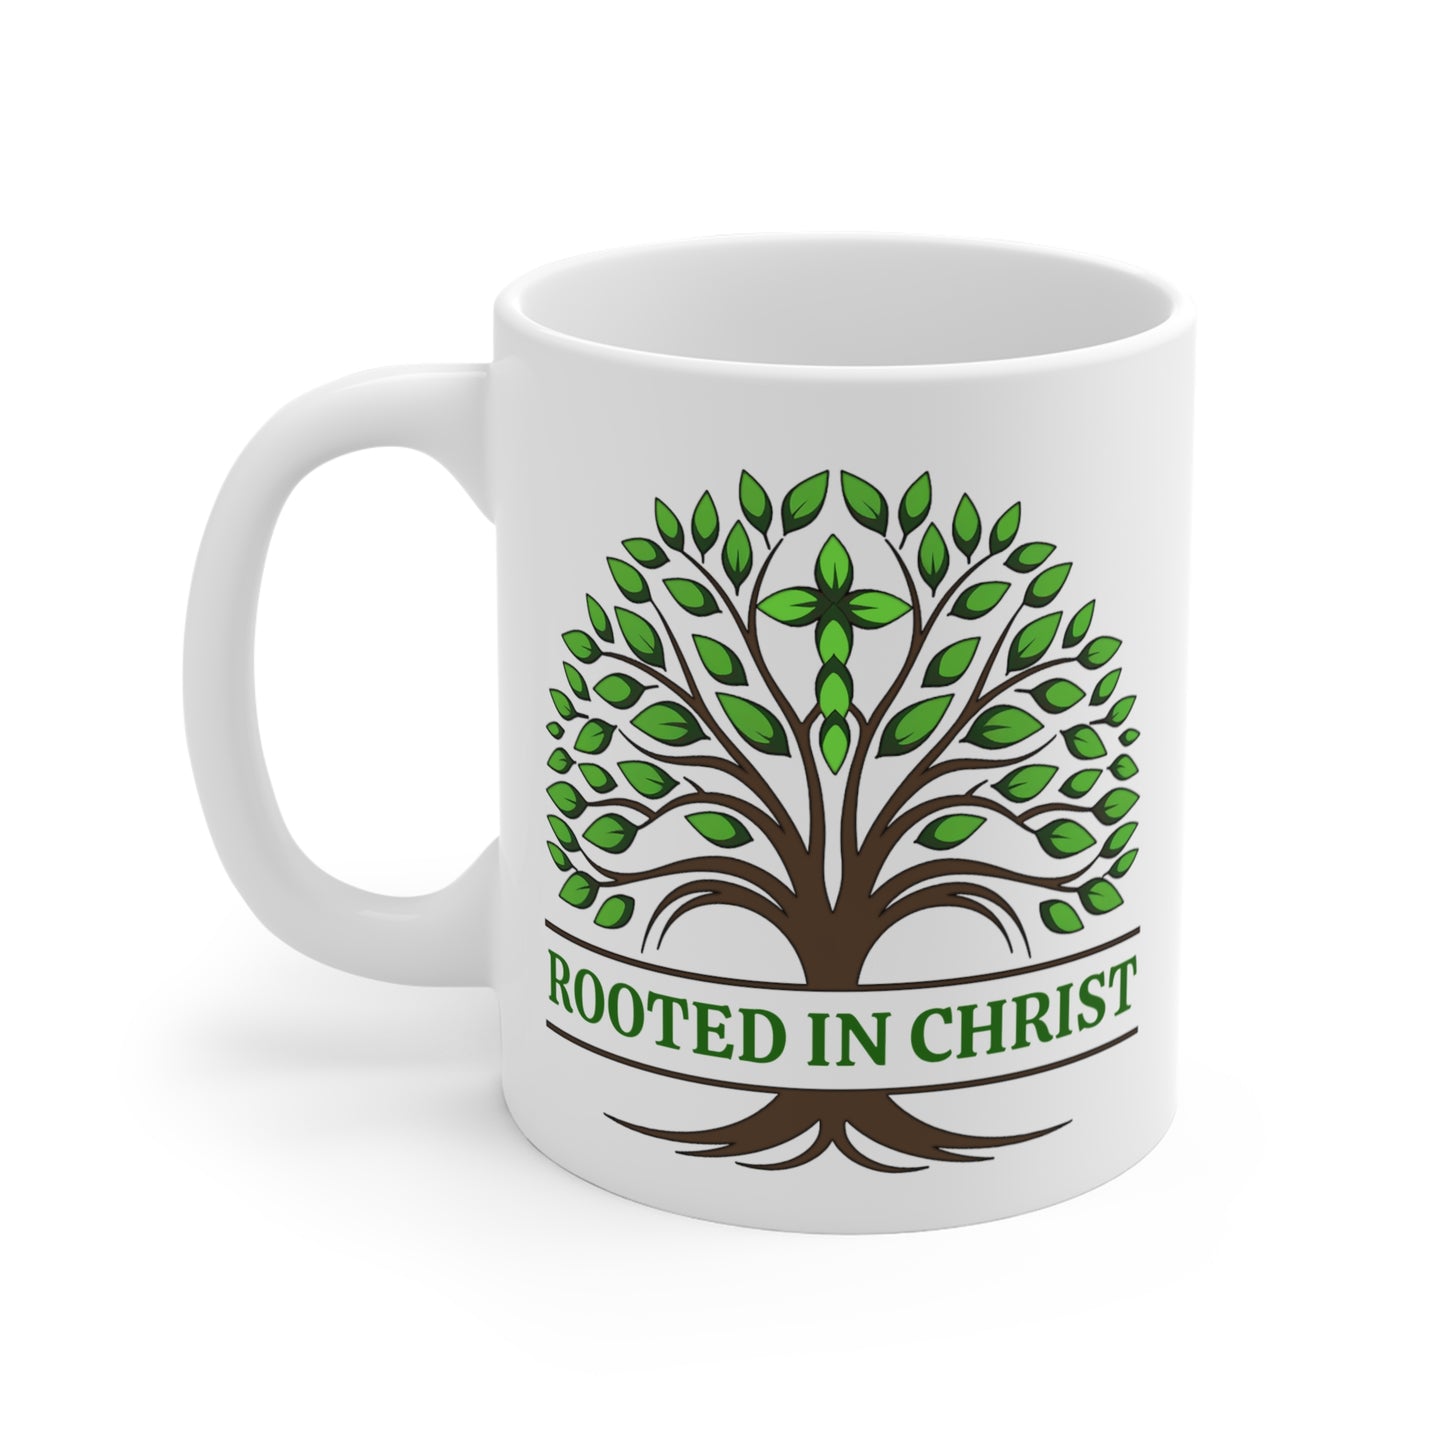 Rooted in Christ - Mug 11oz